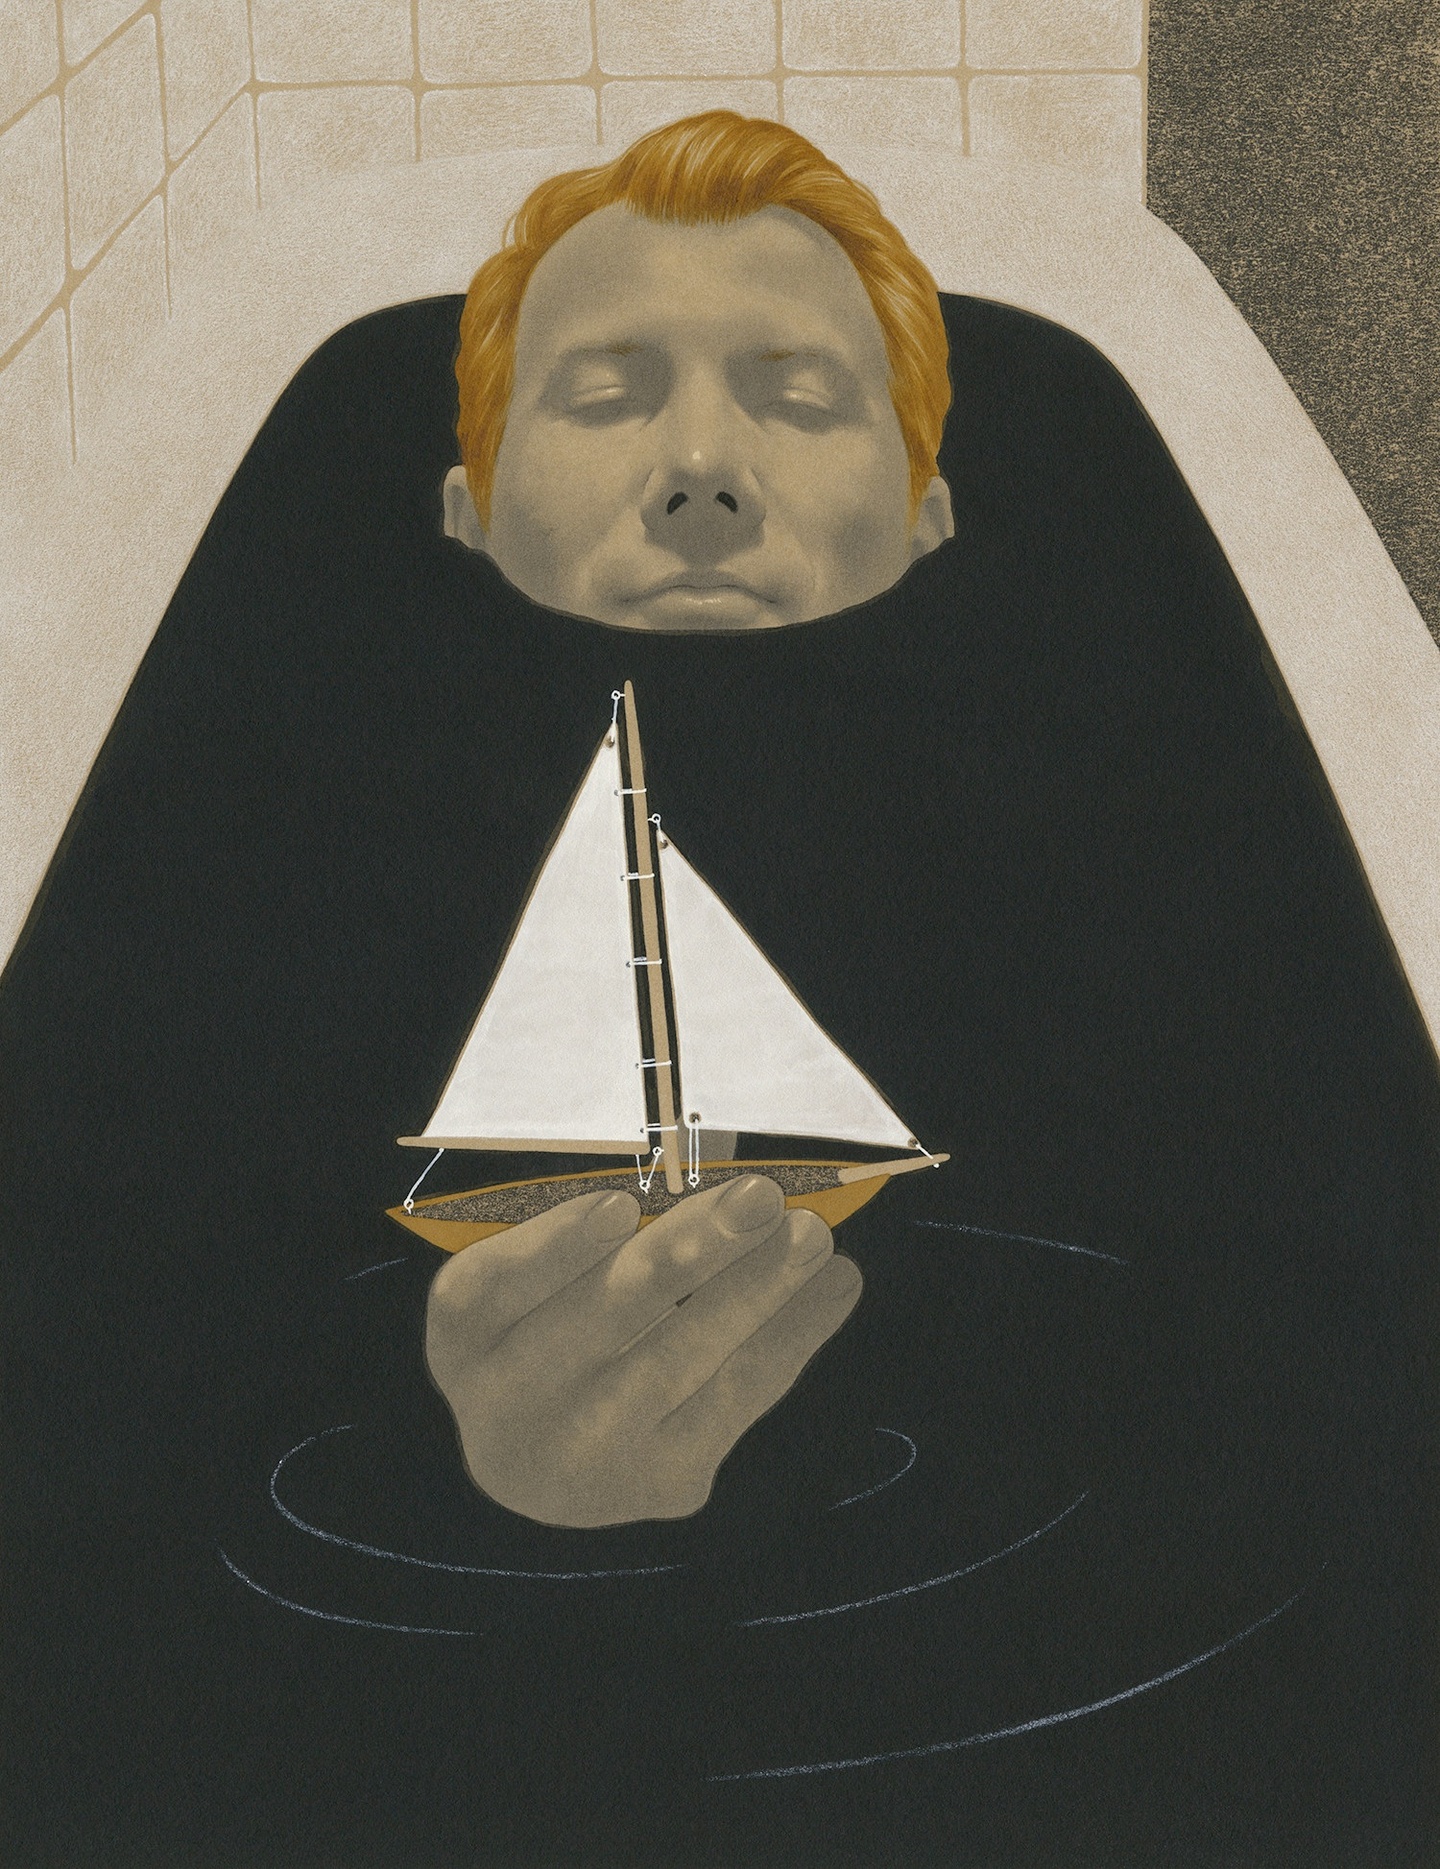 A person submerged in black water in a white bathtub holding a miniature sailboat in their right hand. Their eyes are deep set, shadowed.